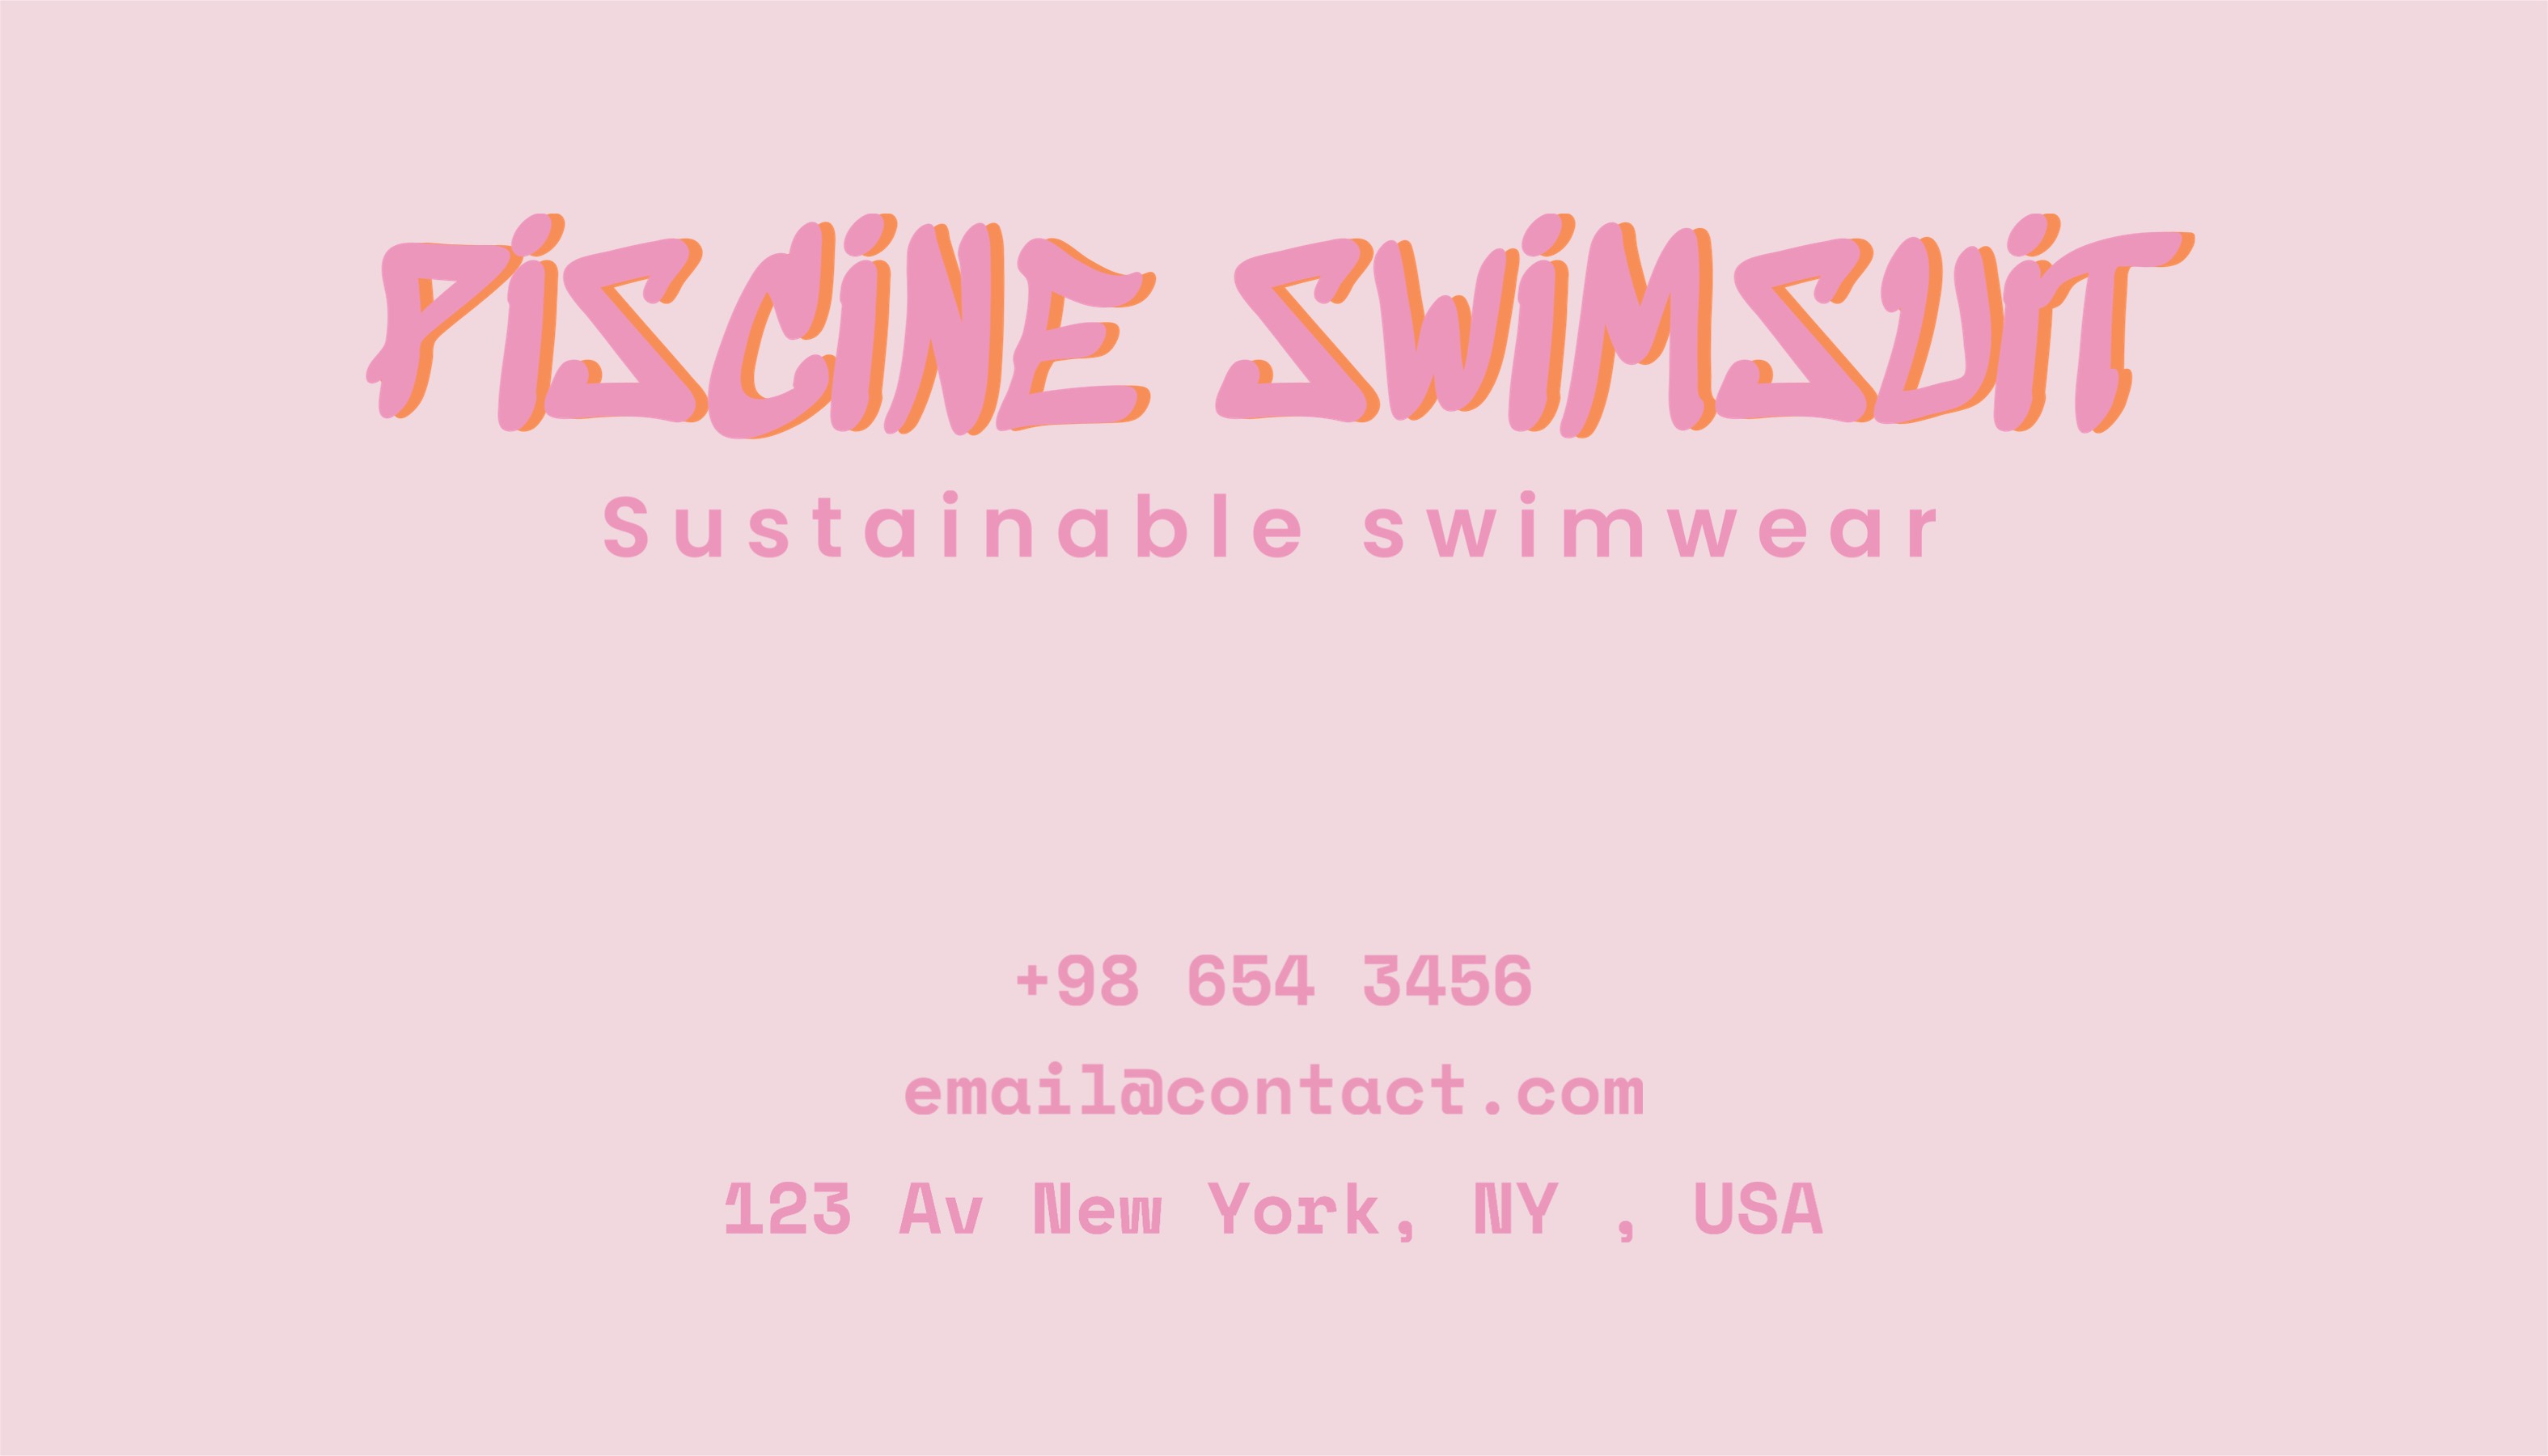 piscine swimsuit logo pink and orange cute business card template 